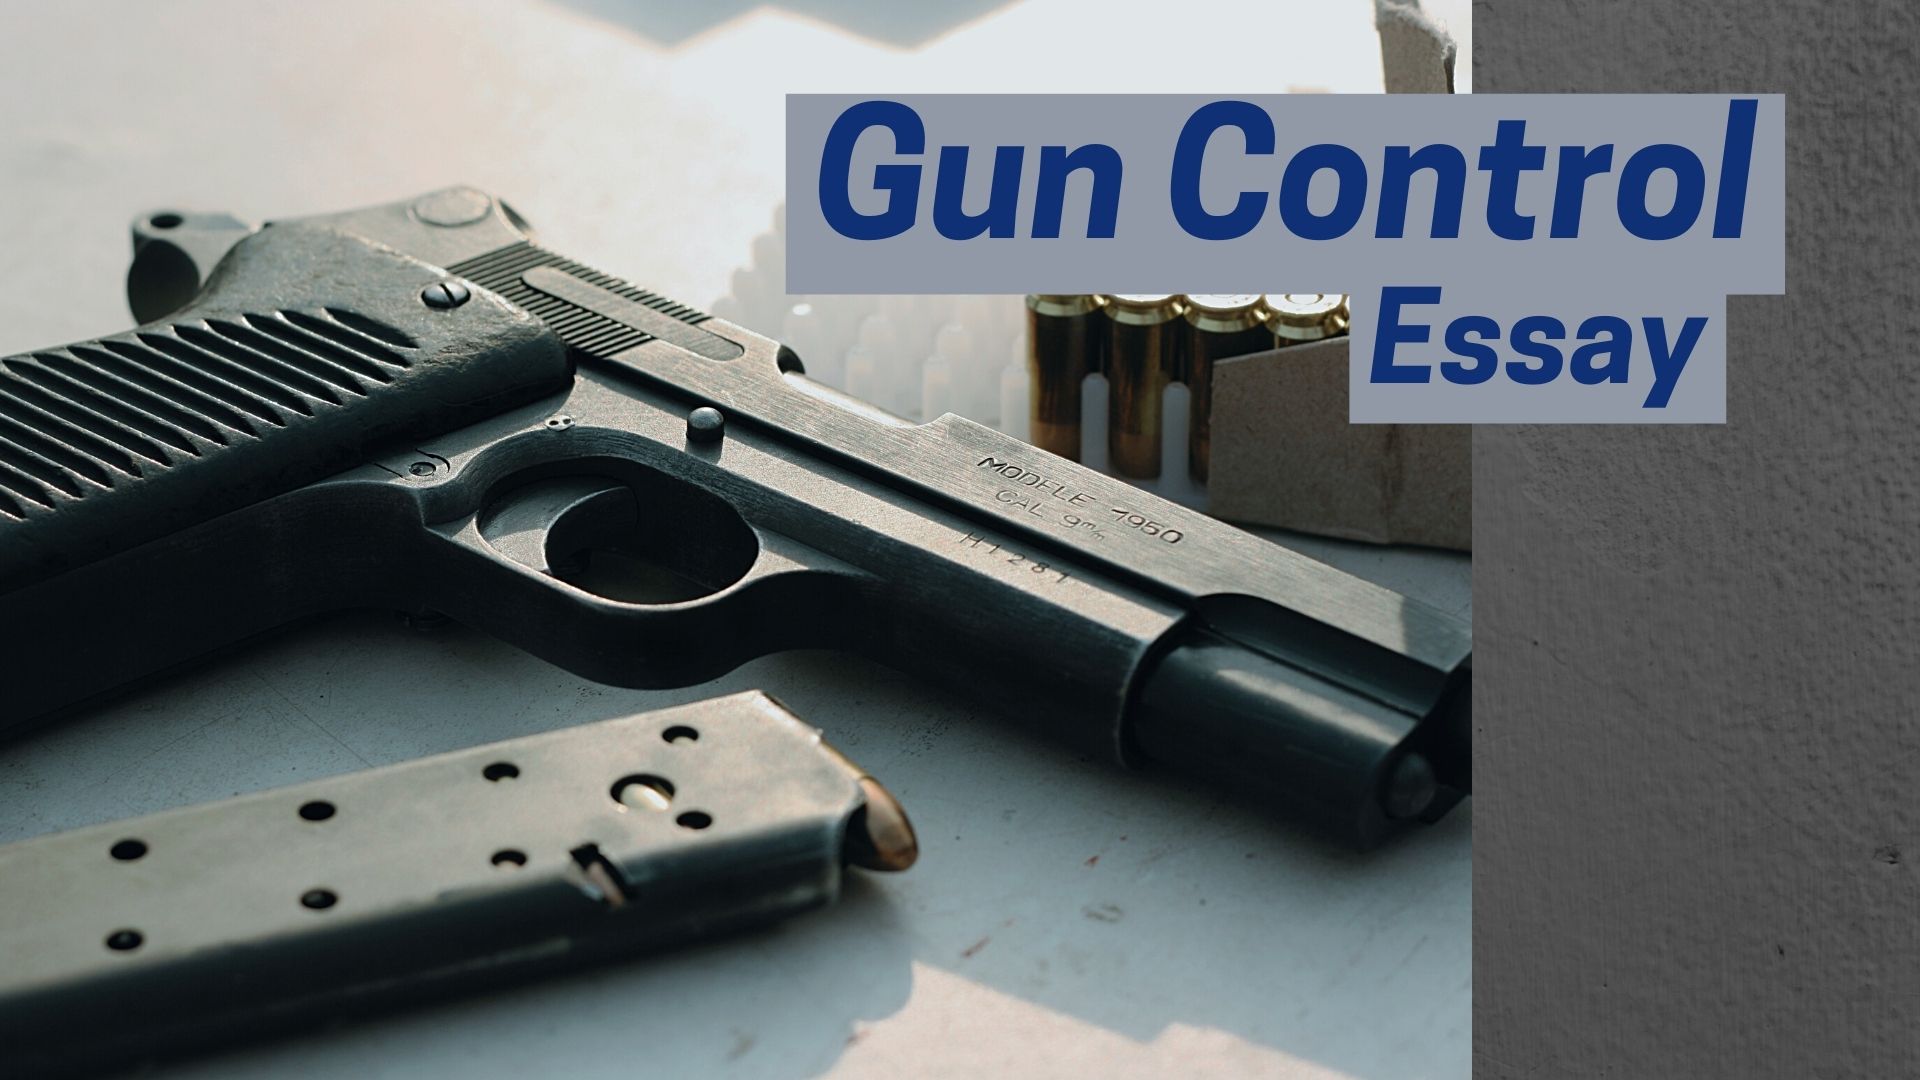 Writing A Gun Control Essay – Are You Pro Or Against It?